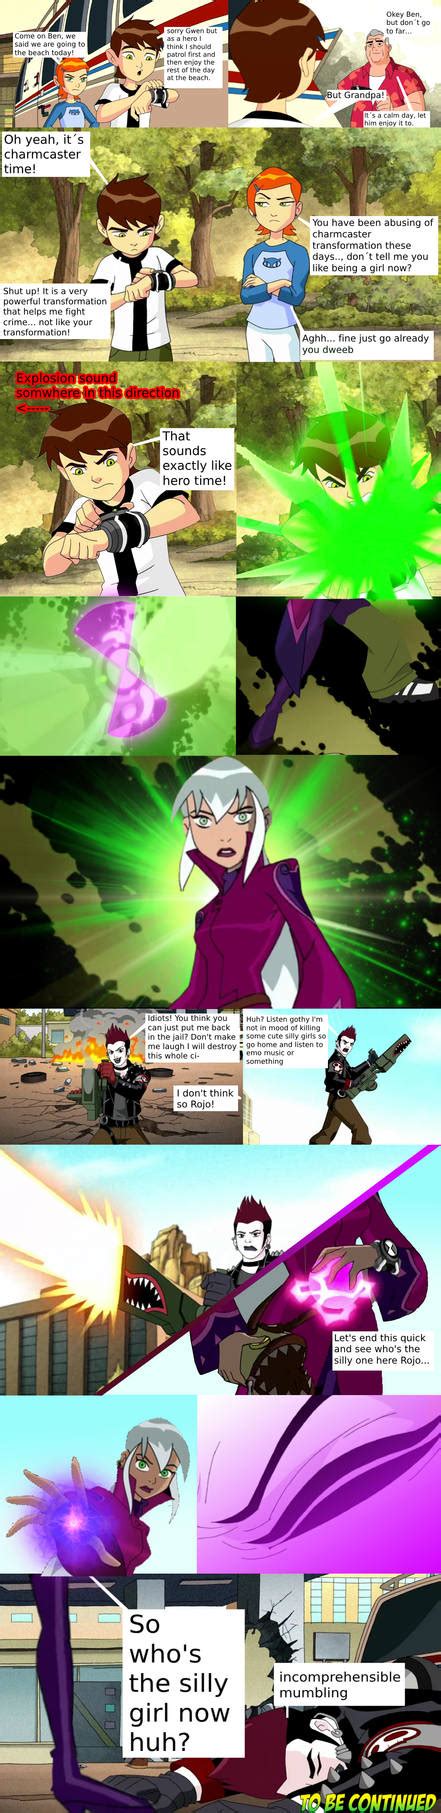 A Charming Beach Day Pt 1 Ben 10 Tg Story By Cooki45 On Deviantart